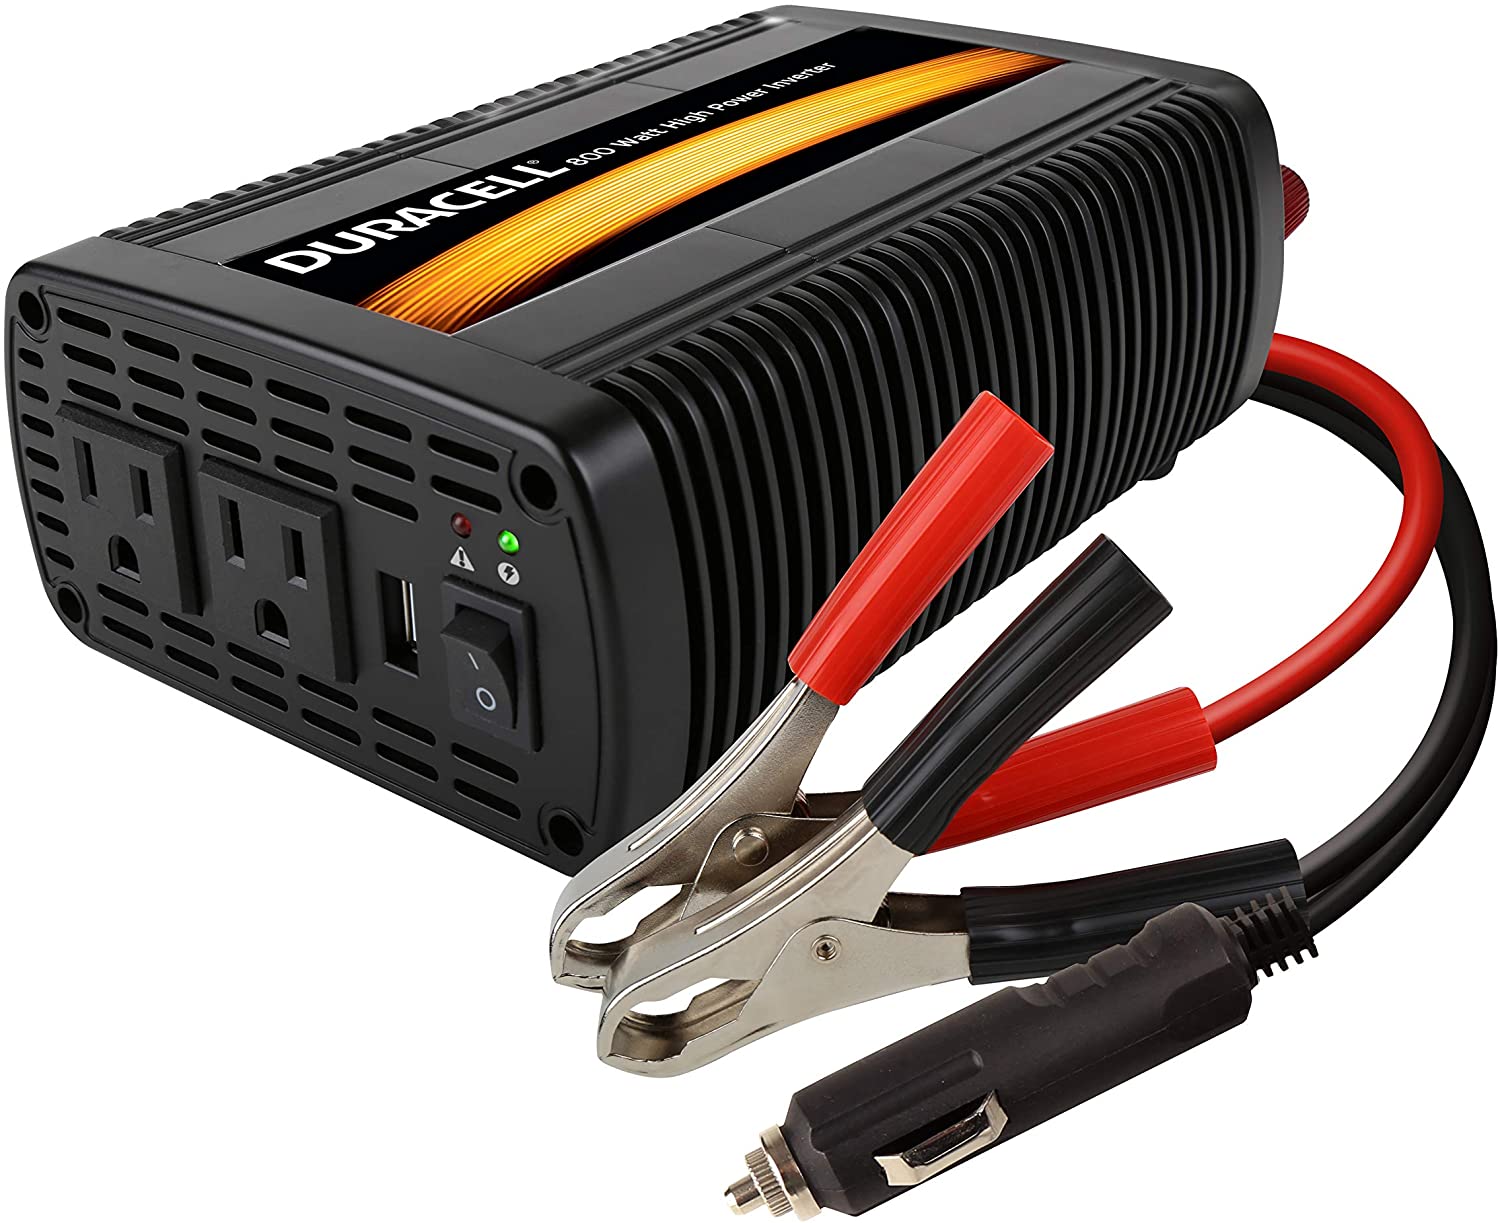 Duracell DRINV800 High Power Inverter 1600 Watt Peak 800W Continuous, 12v DC Input Includes 2 AC Outlets (115V) Plus 2.1 Amp USB (5V)